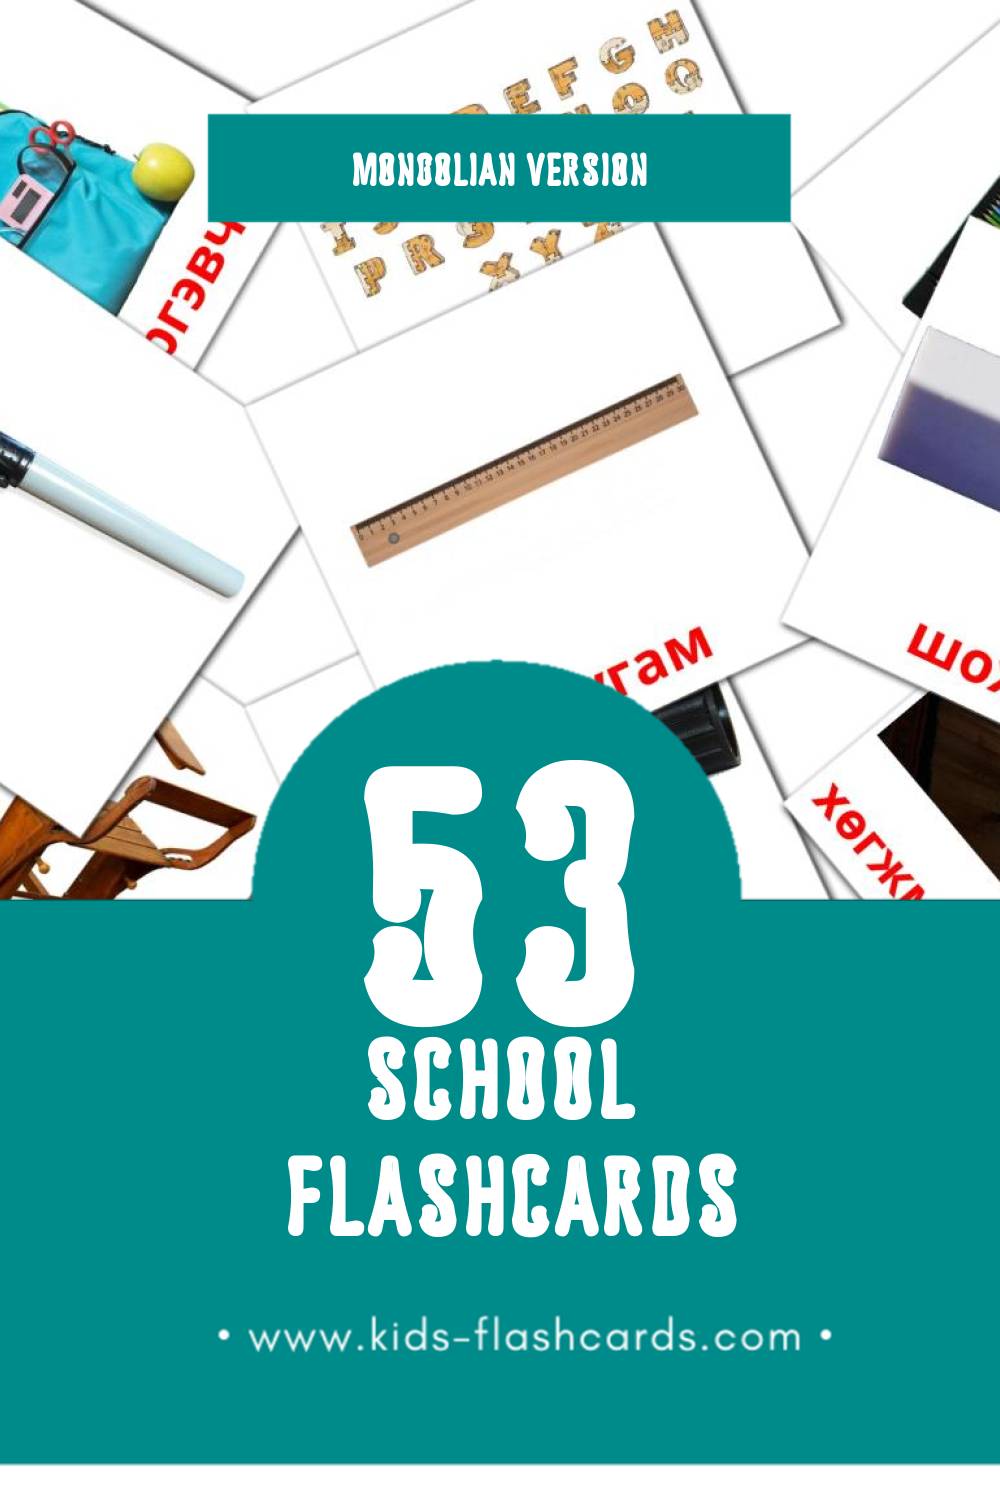 Visual Сургууль Flashcards for Toddlers (53 cards in Mongolian)